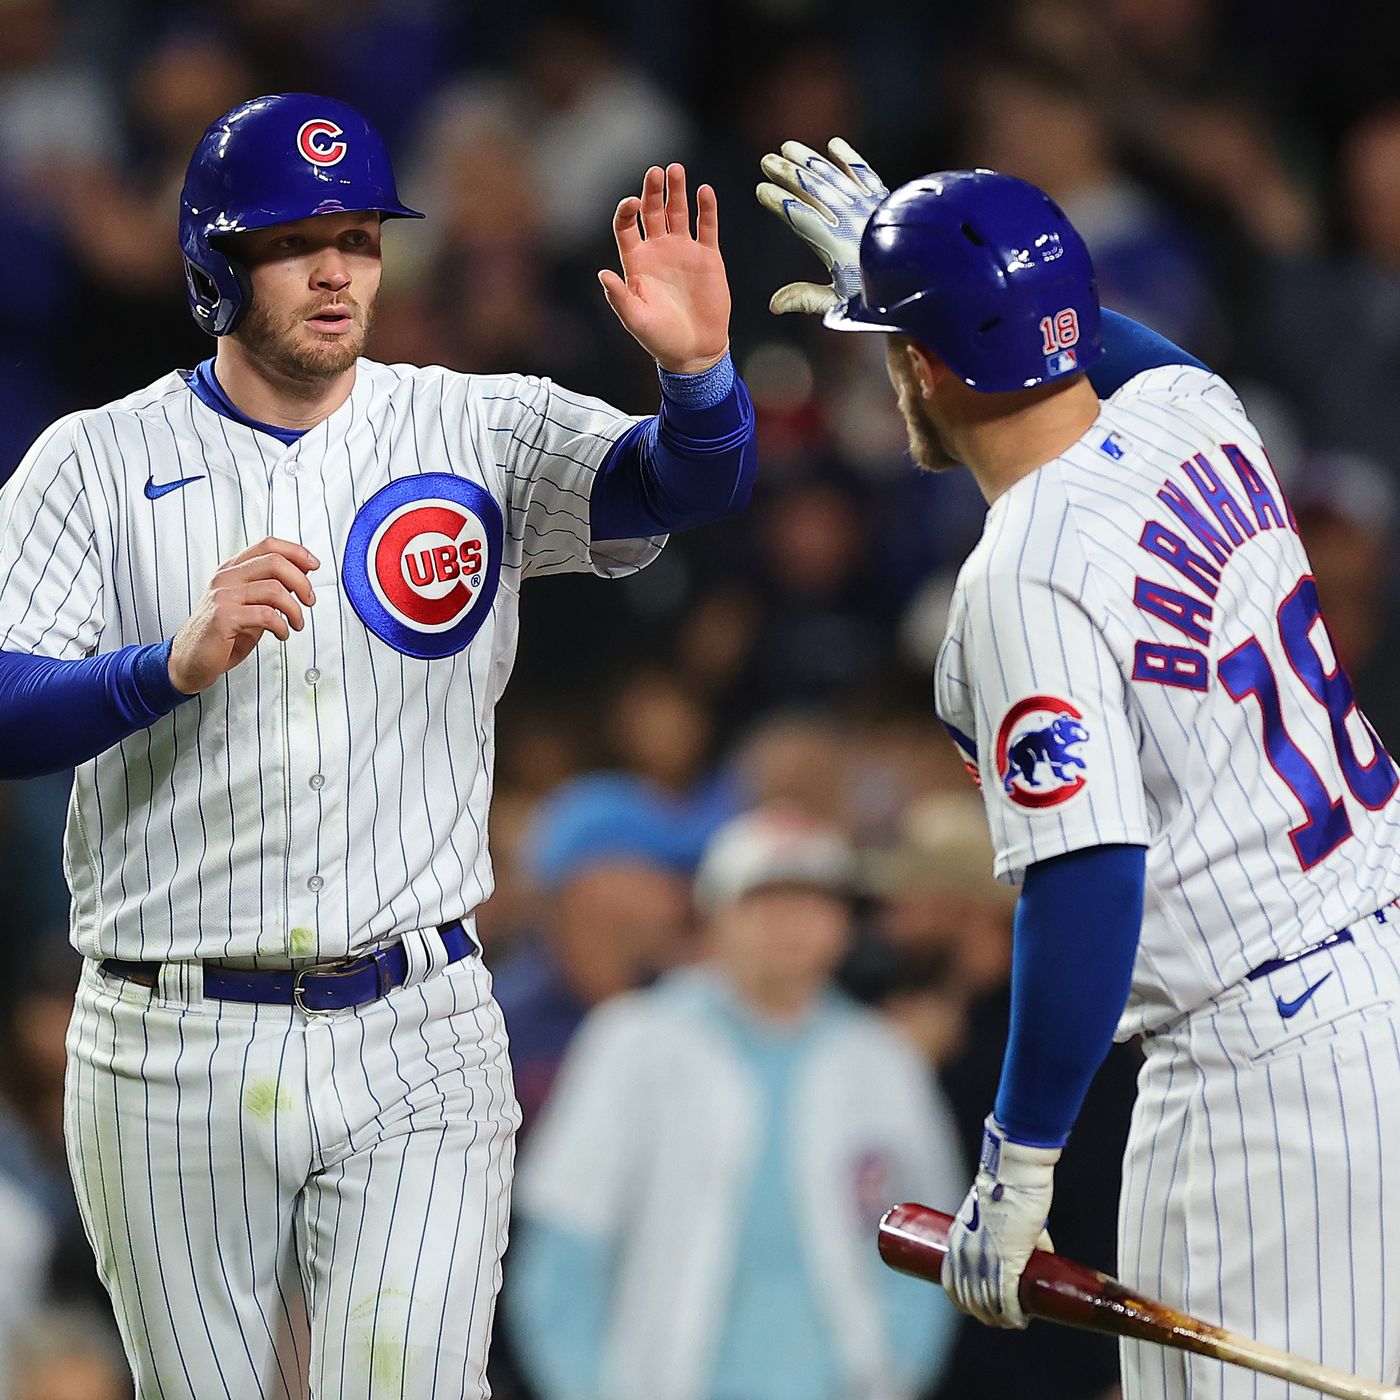 Pirates 2, Cubs 1: A Real Throwback - Bleed Cubbie Blue